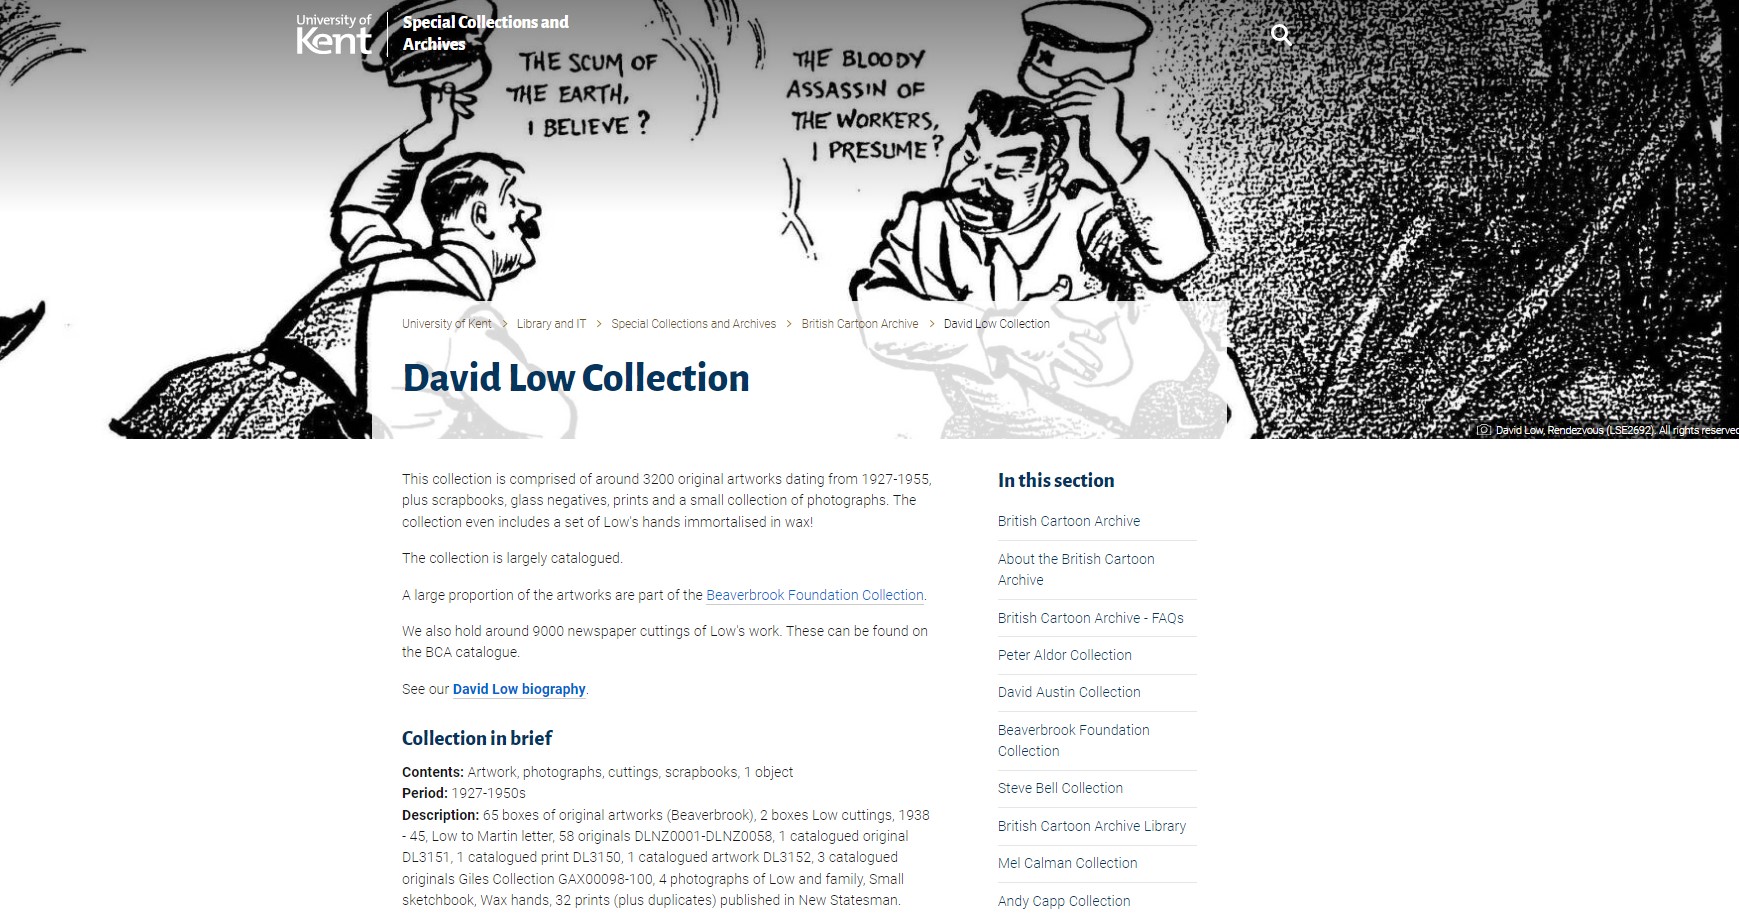 Screenshot of the David Low Collection page on our new website with a famous Low cartoon as its background.